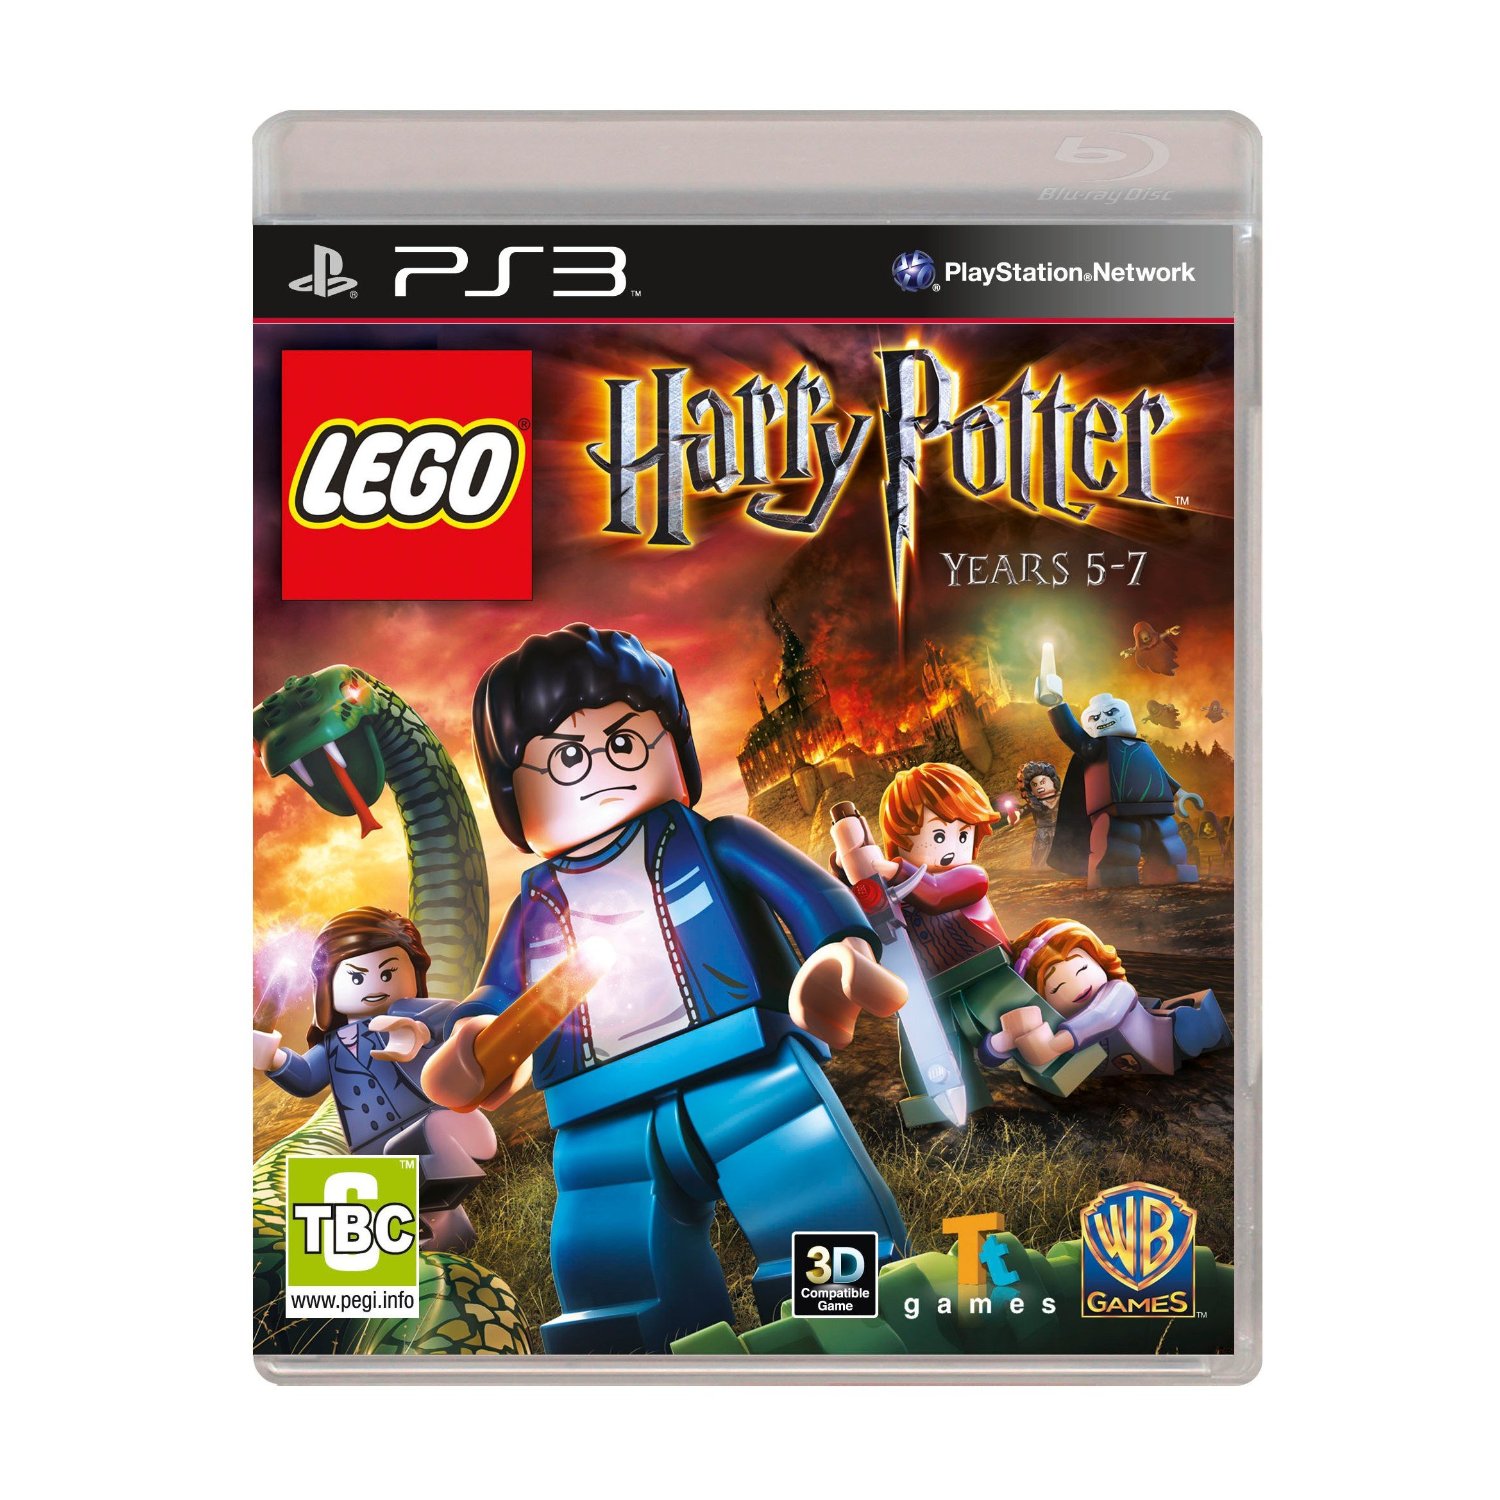 Warner Lego Harry Potter Years 5-7 PS3